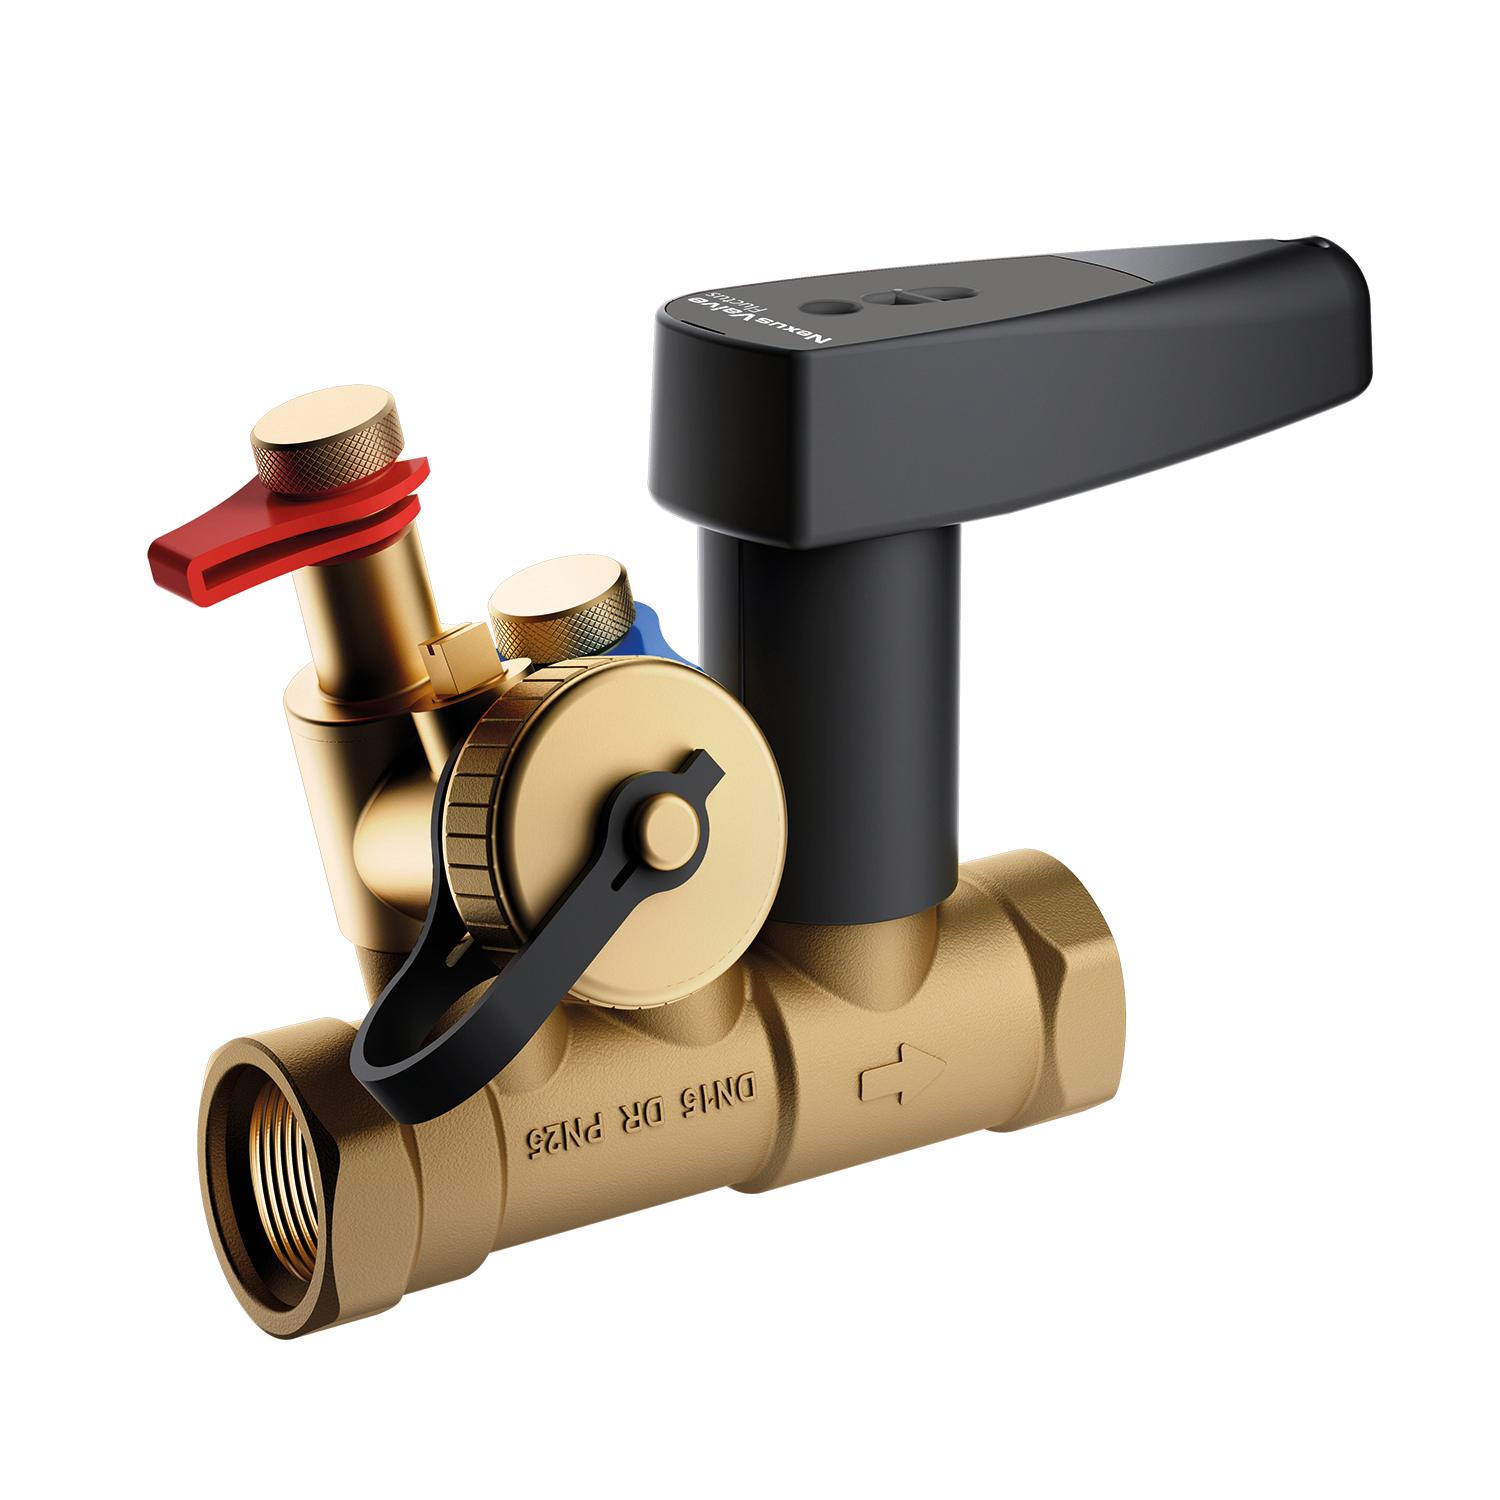 NexusValve Fluctus with fill and drain ball valve / connection for NexusValve Passim